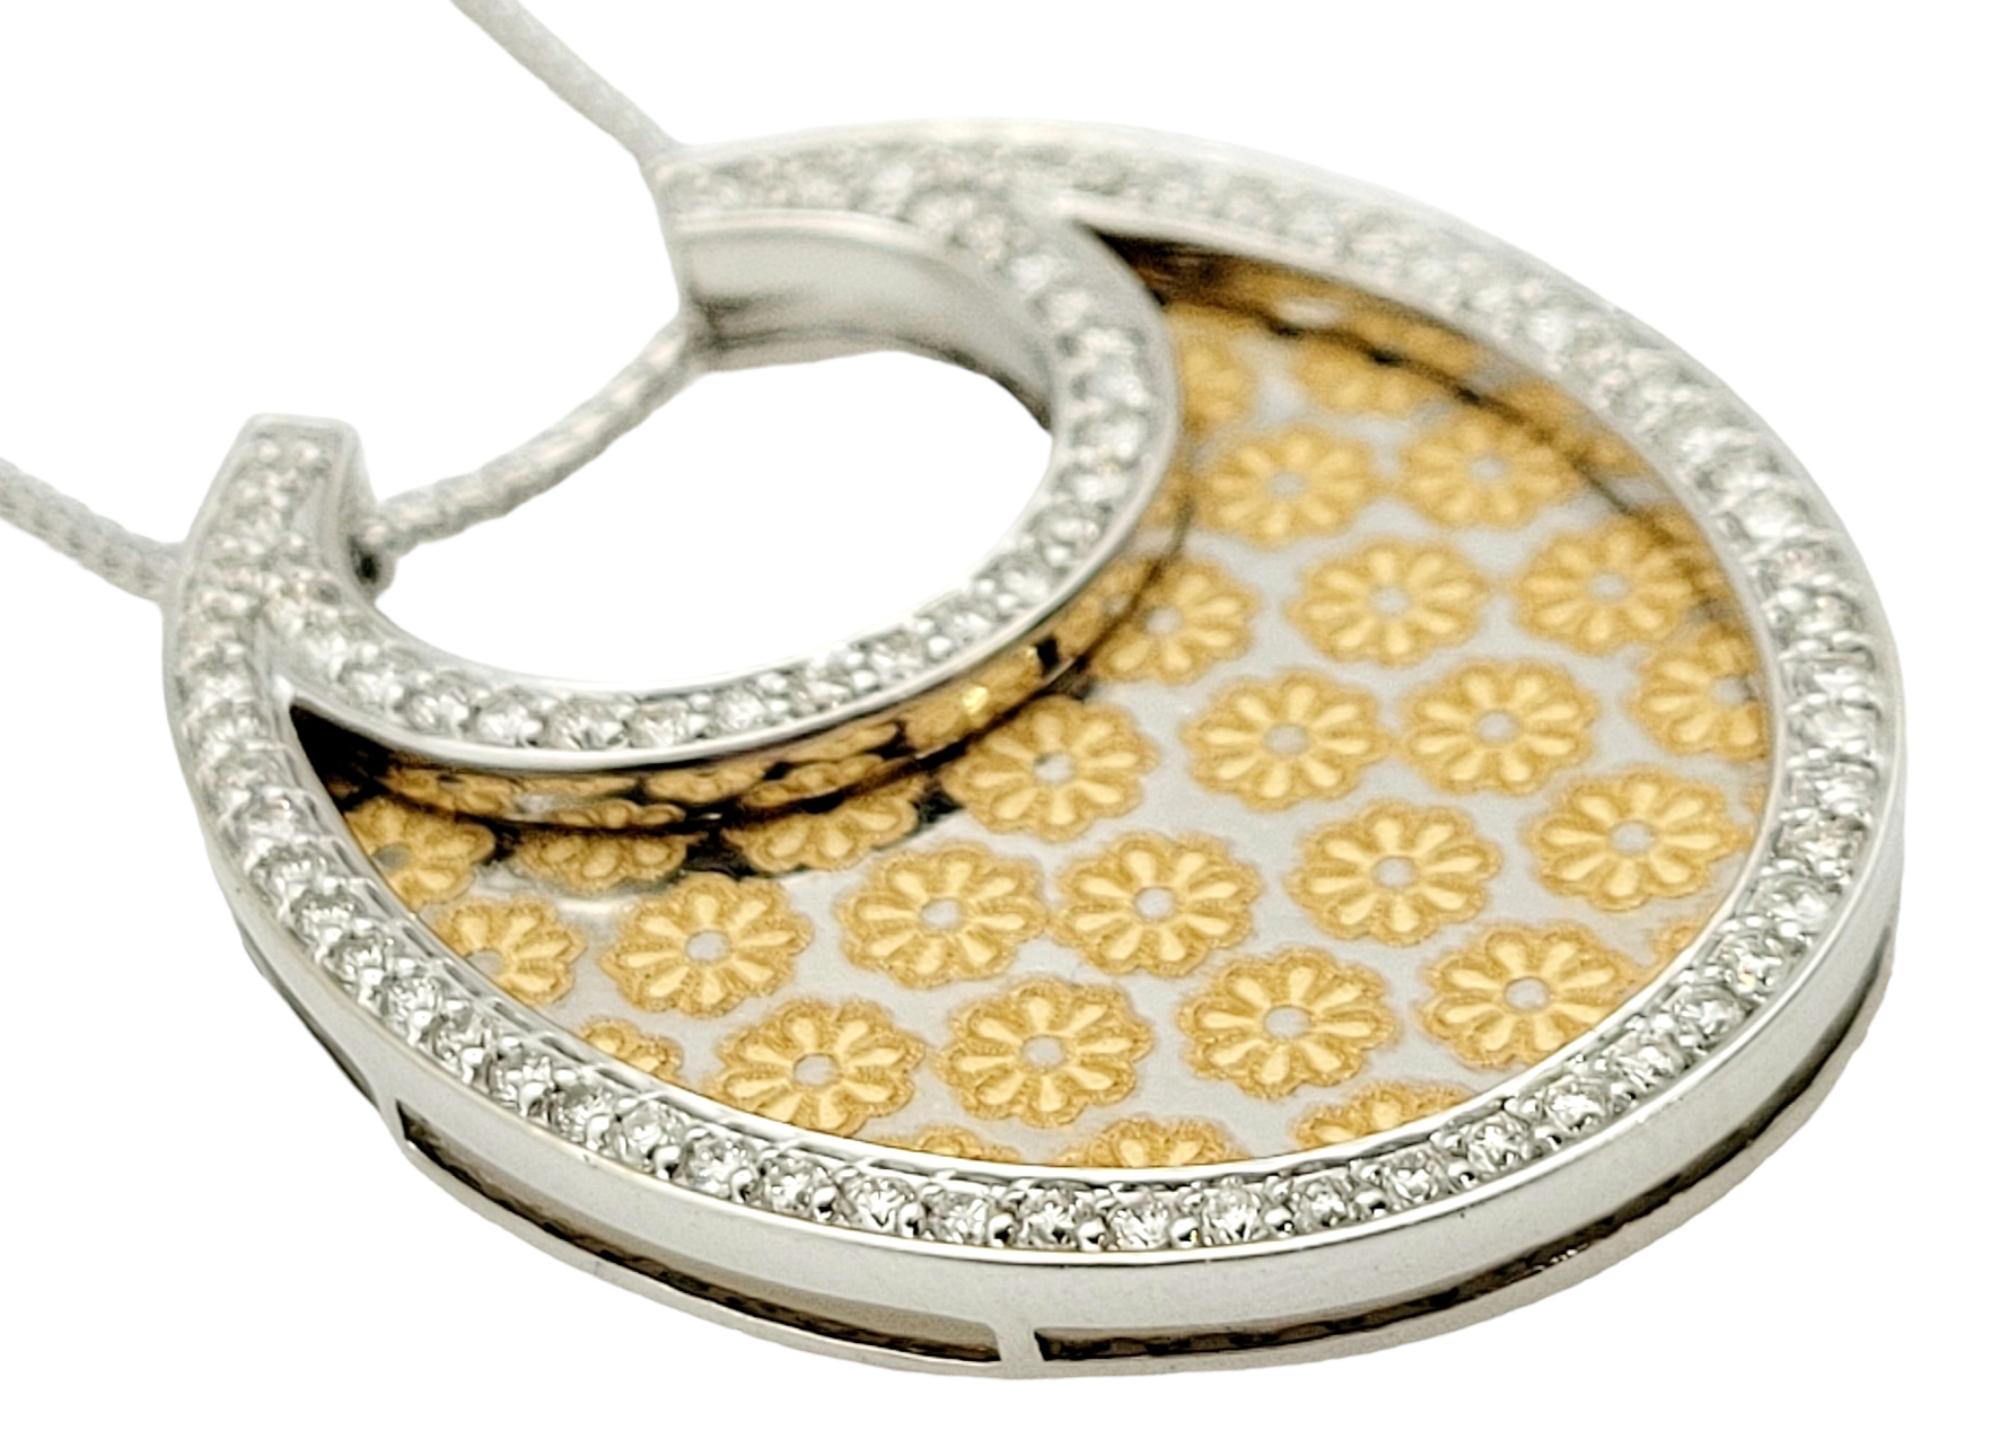 Incredibly stunning gold floral etched necklace. This beautiful necklace features a halo of 76 diamonds around the pendant. The diamonds are round brilliant, H-J in color, and SI-1 to SI-2 in clarity. These gorgeous diamonds truly sparkle and shine